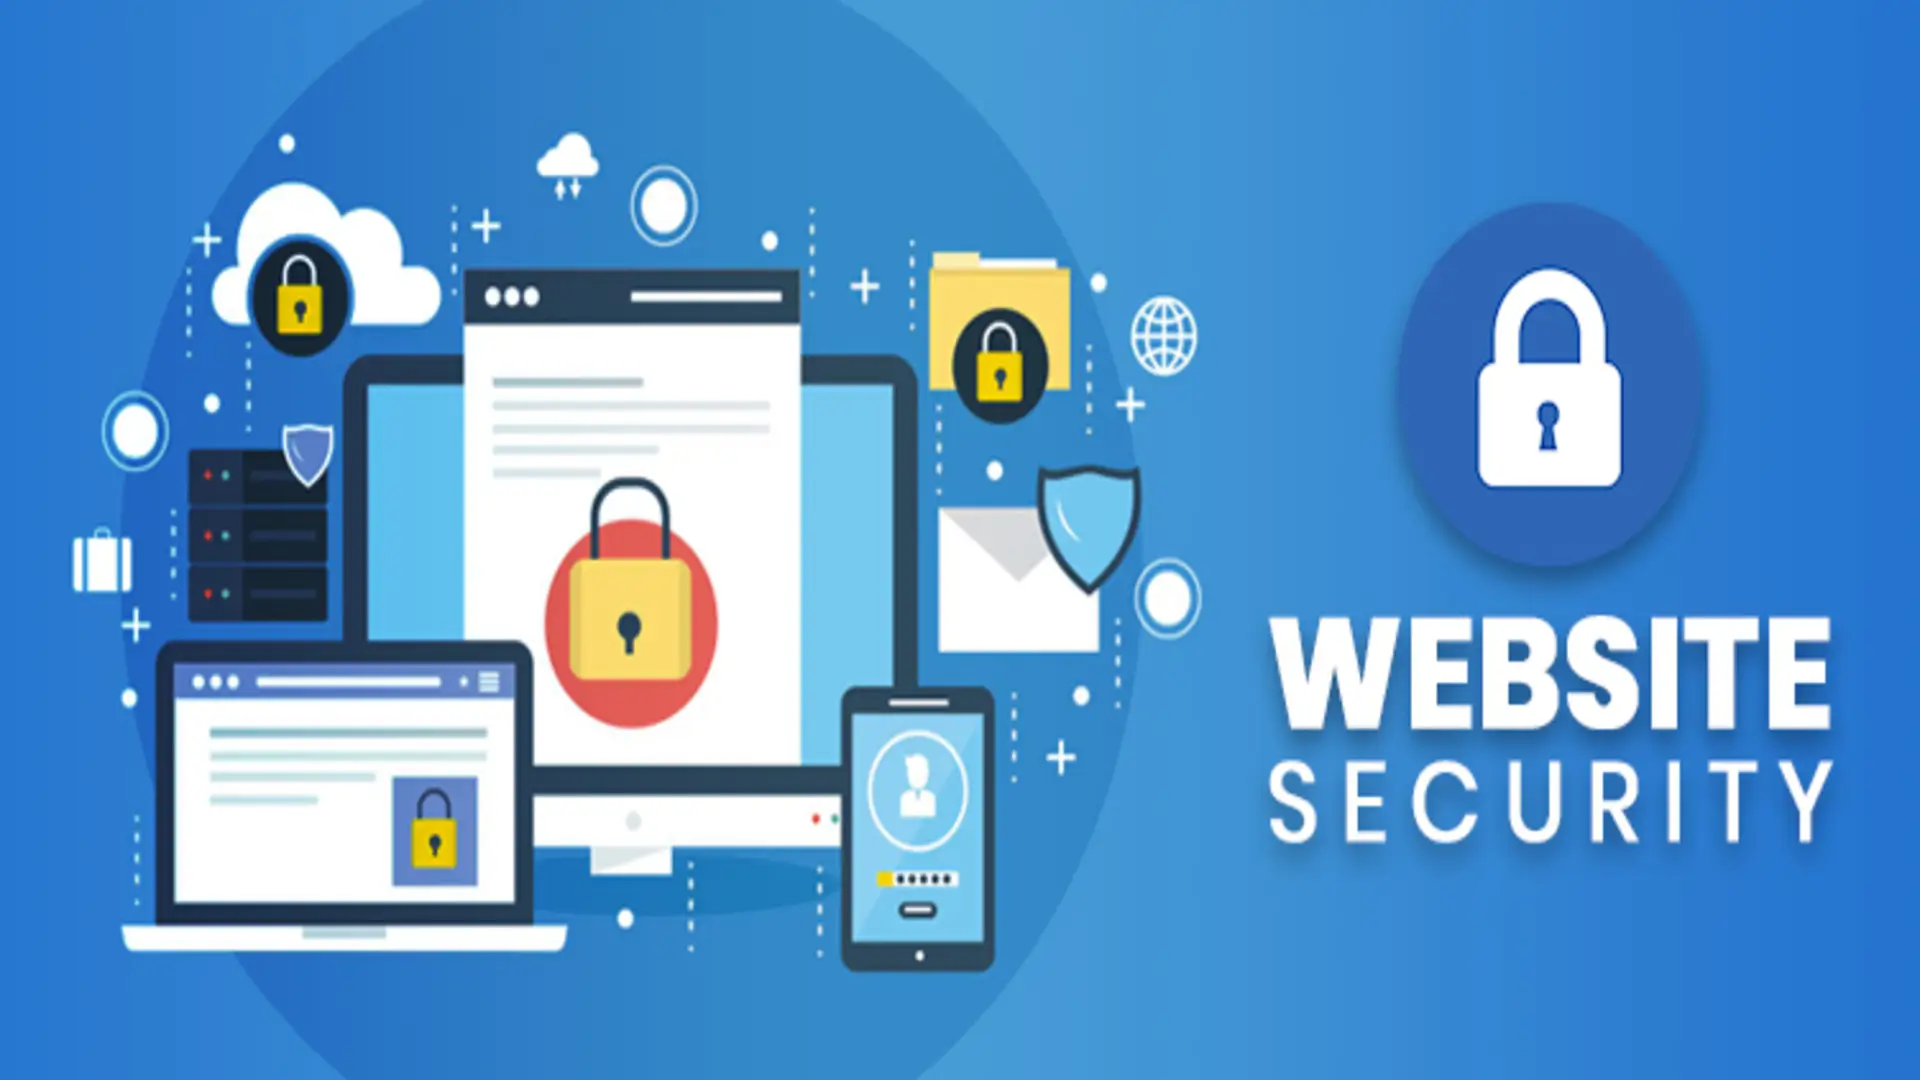 8 Tips to Improve Your Website Security